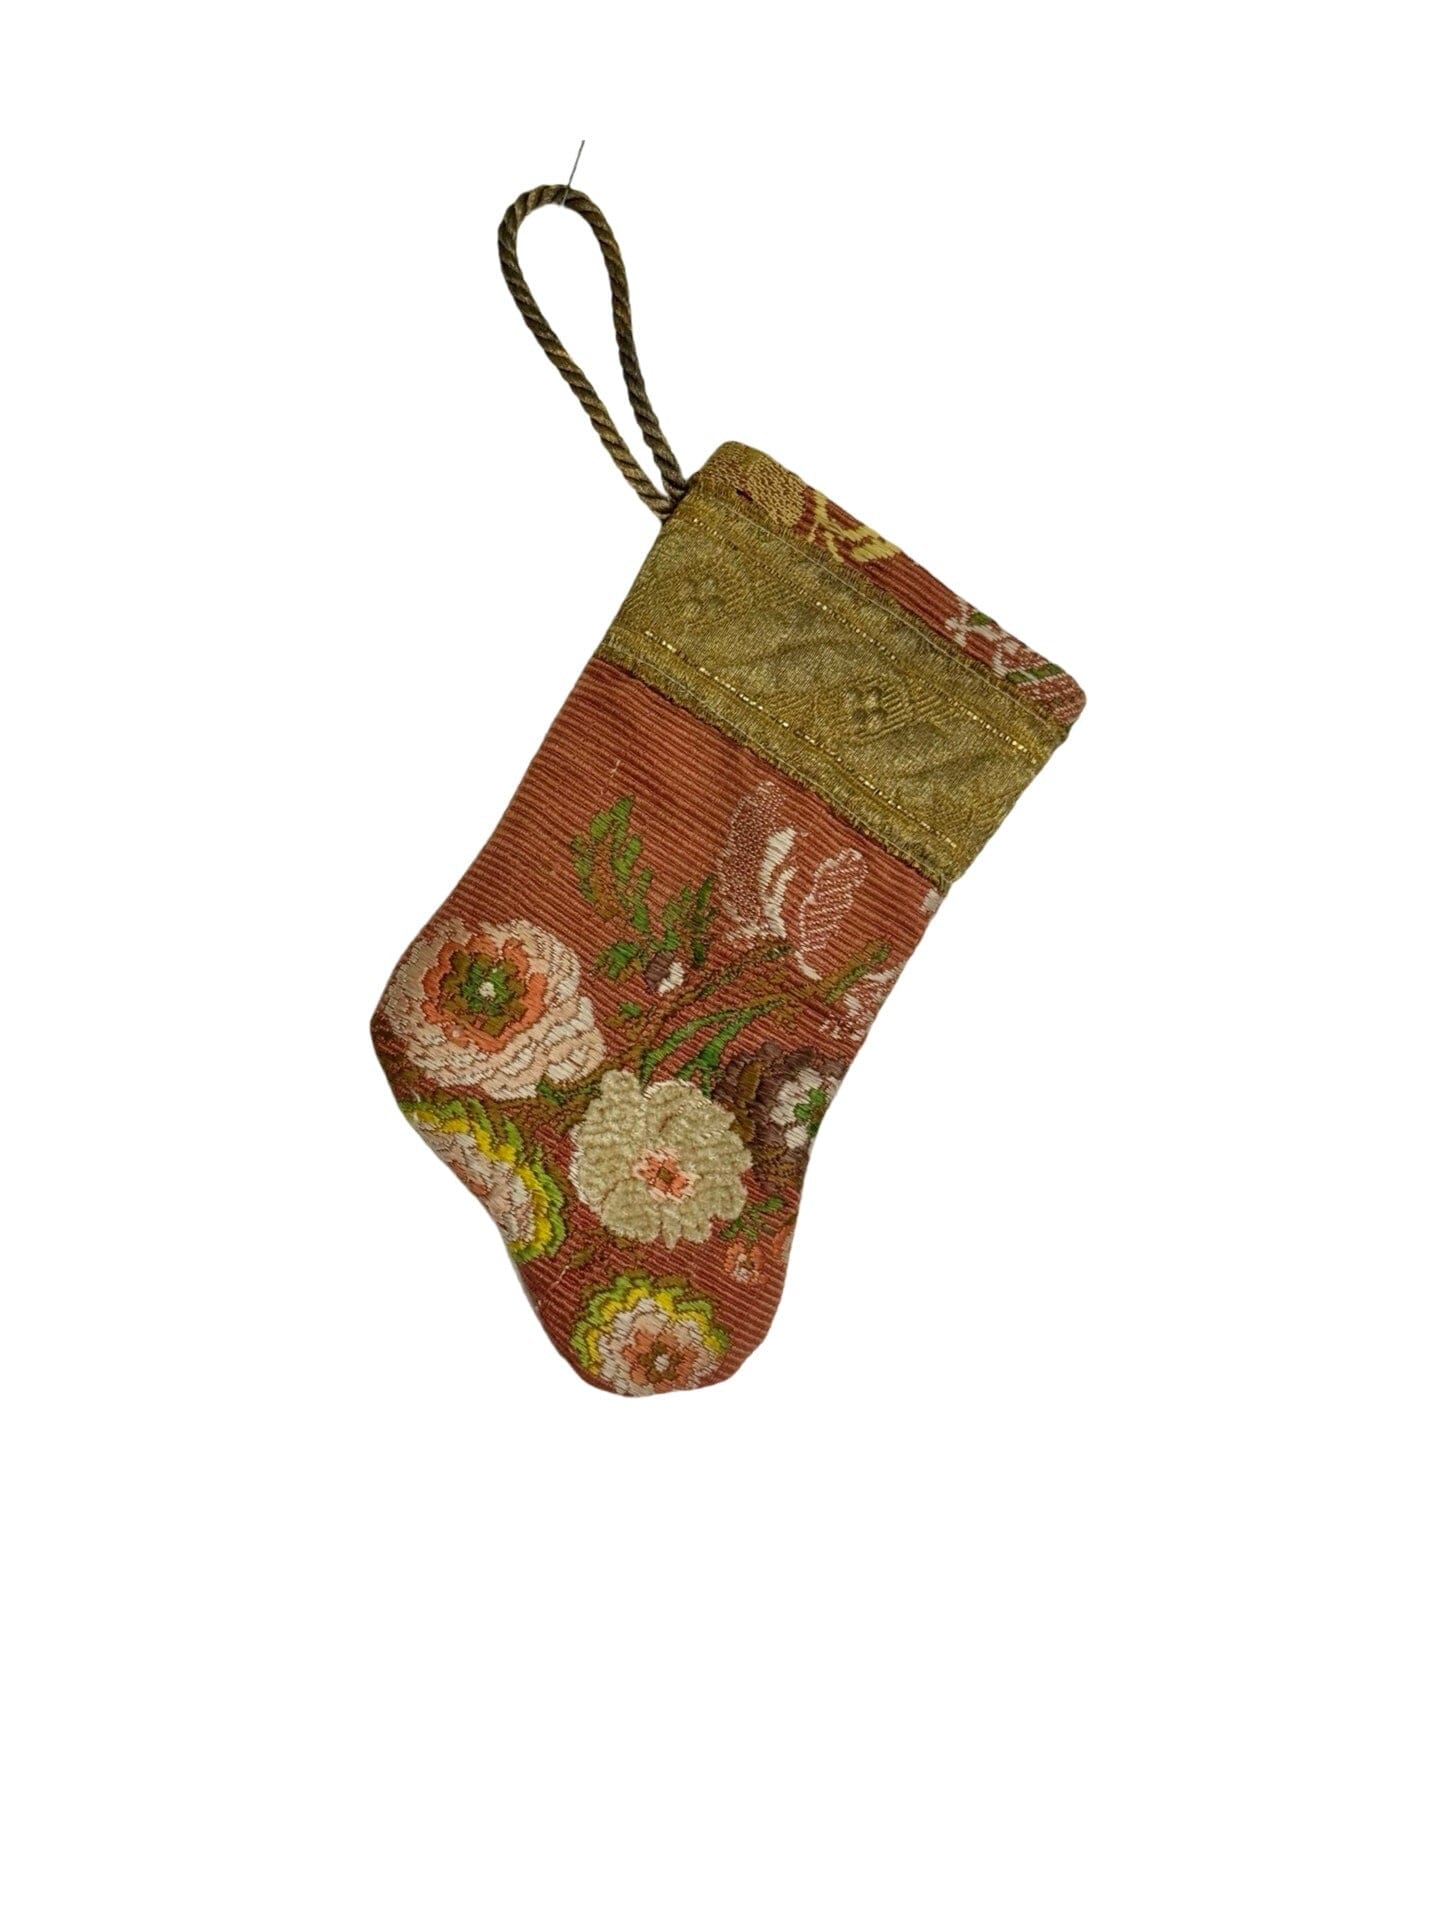 Handmade Mini Stocking Made From Vintage Fabric and Trims- Bronze Rose Floral Ornament B. Viz Design A 